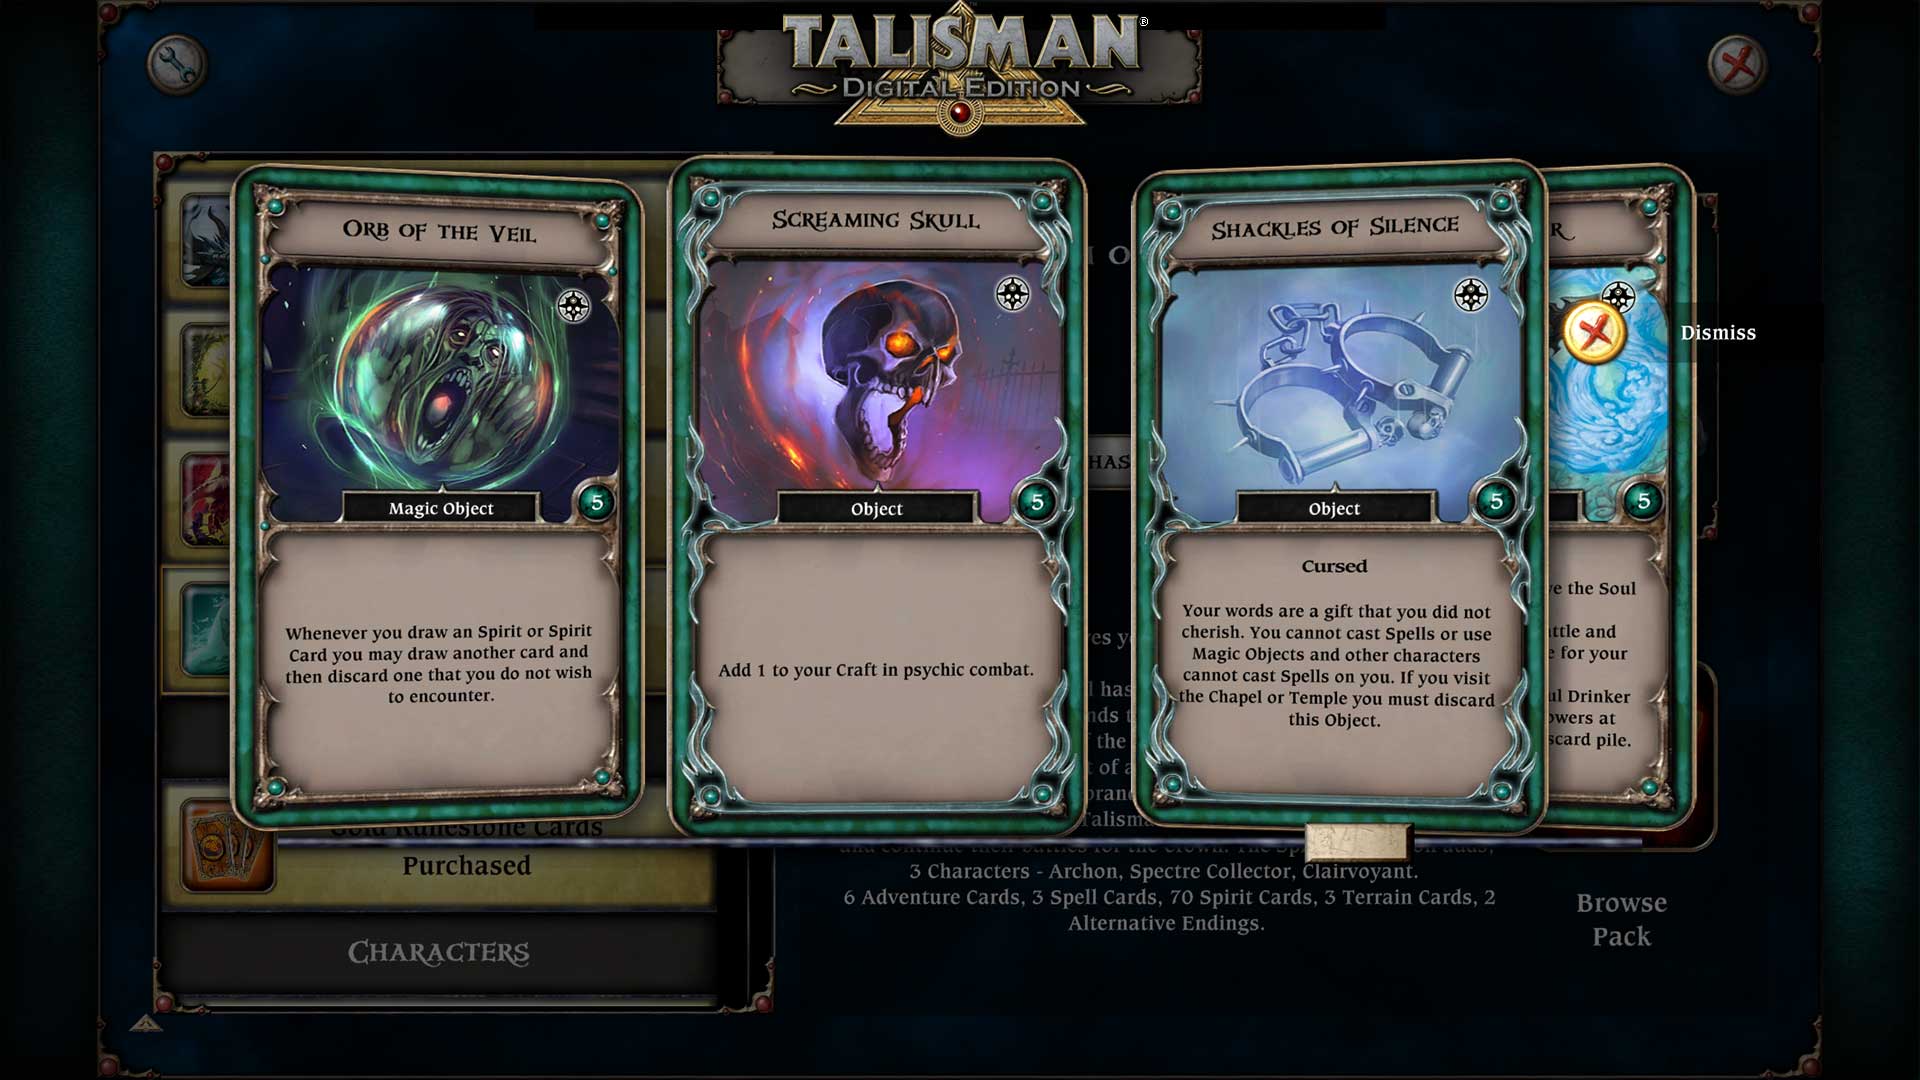 Talisman - The Realm of Souls Expansion DLC Steam CD Key [$ 2.16]